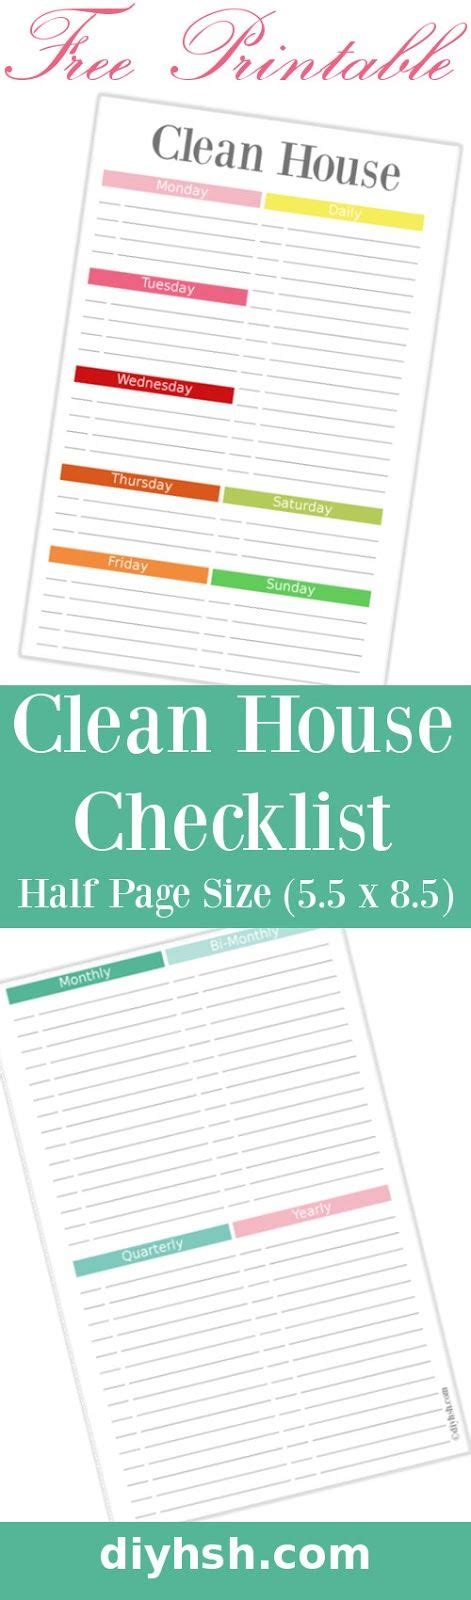 See more ideas about free printables, printables, digital paper free. DIY Home Sweet Home: Clean House Checklist - Free ...